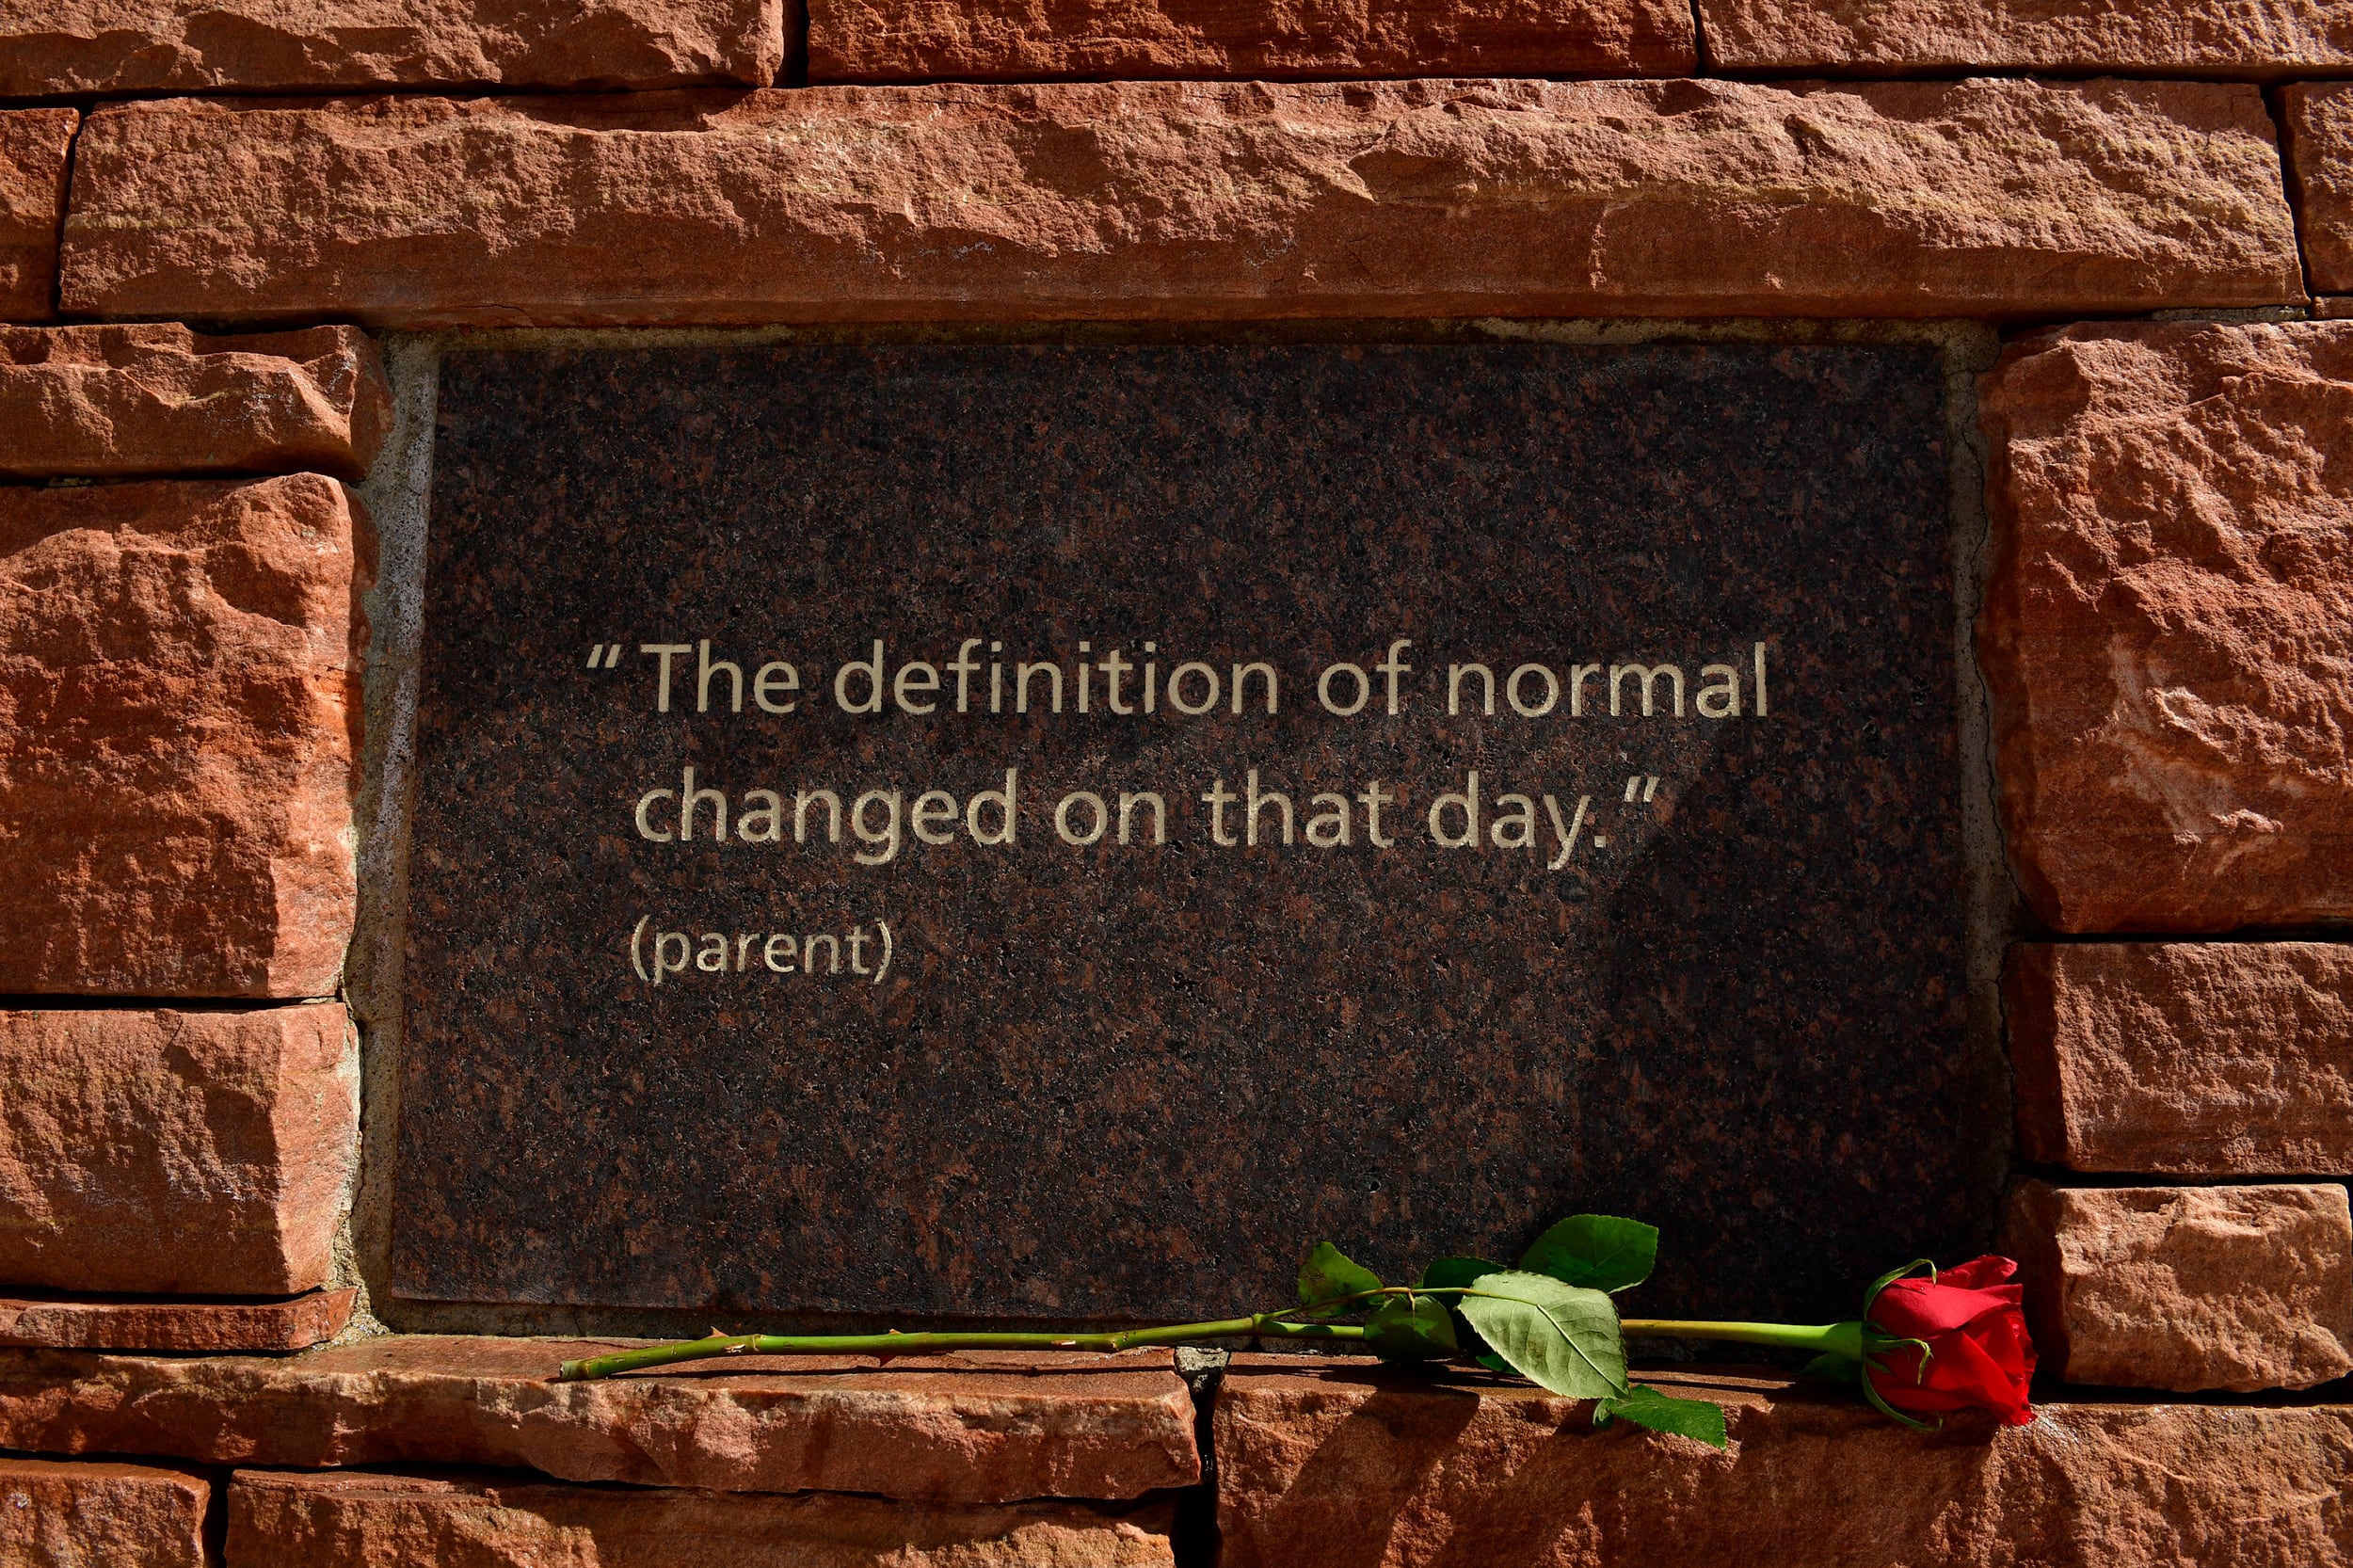 A black placard that reads "The definition of normal changed on that day. (parent)" surrounded by red stone and a single red rose placed near the bottom.